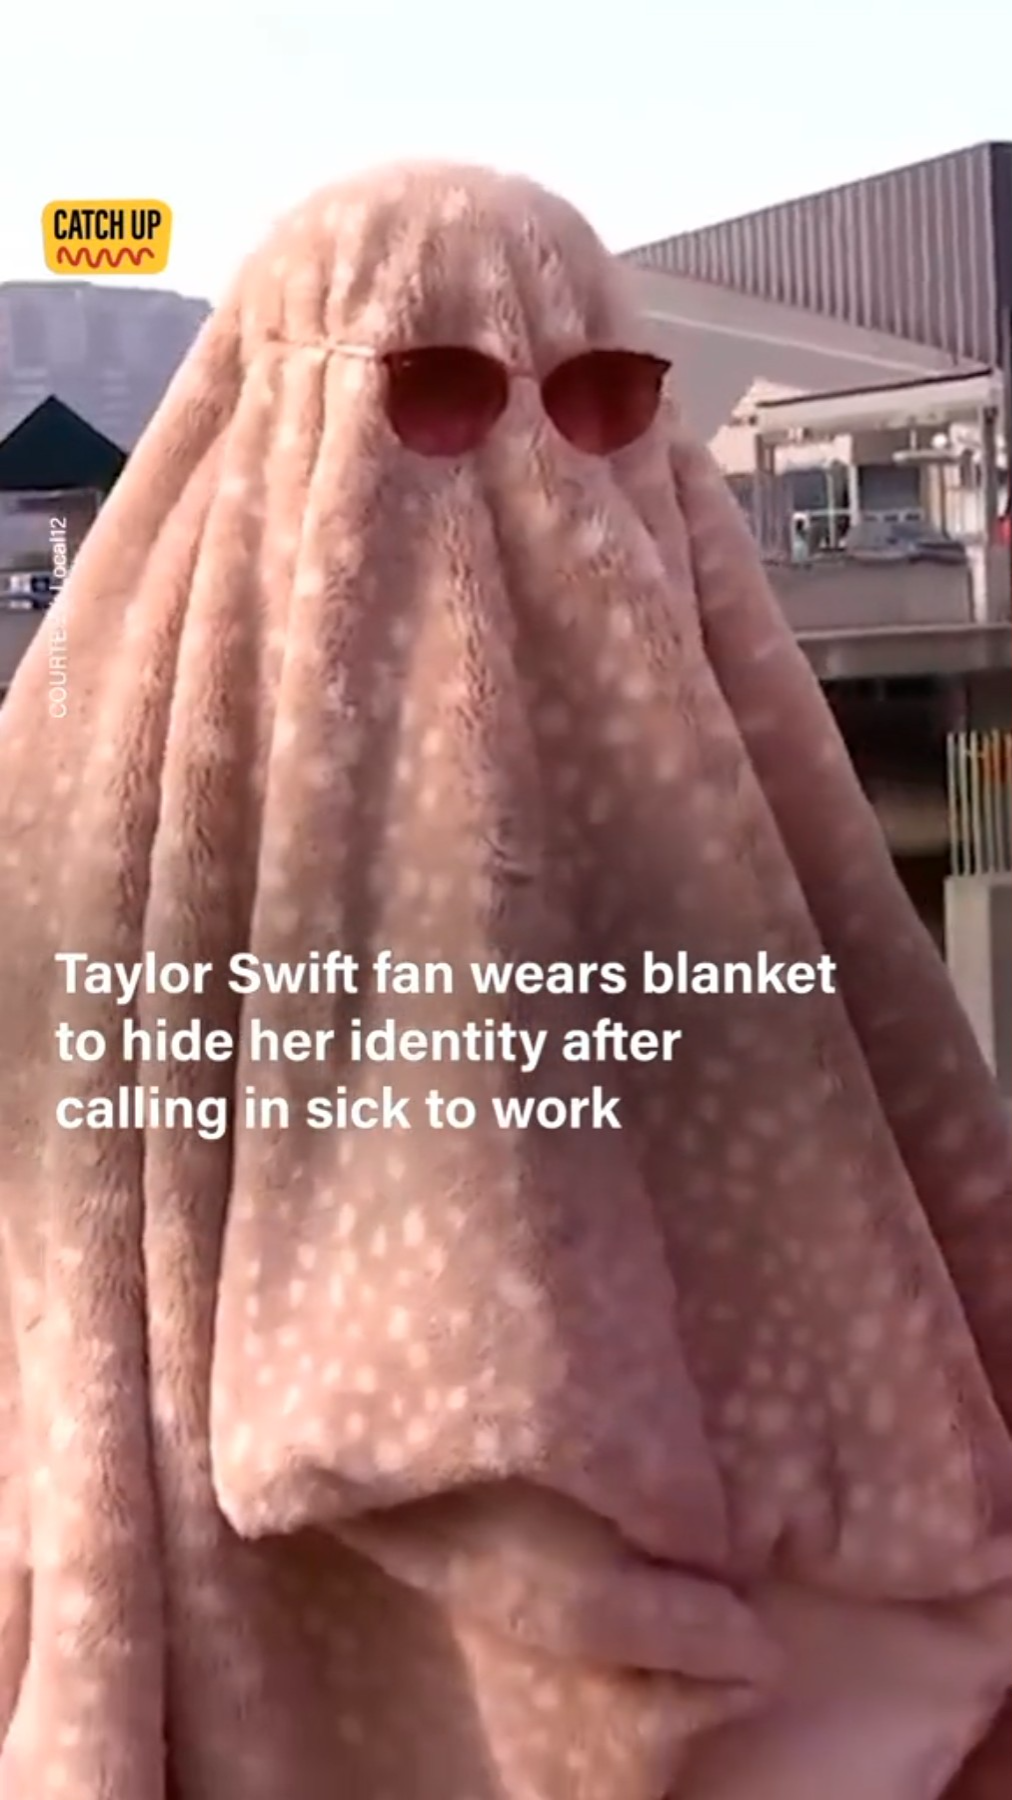 octopus - Catch Up Taylor Swift fan wears blanket to hide her identity after calling in sick to work